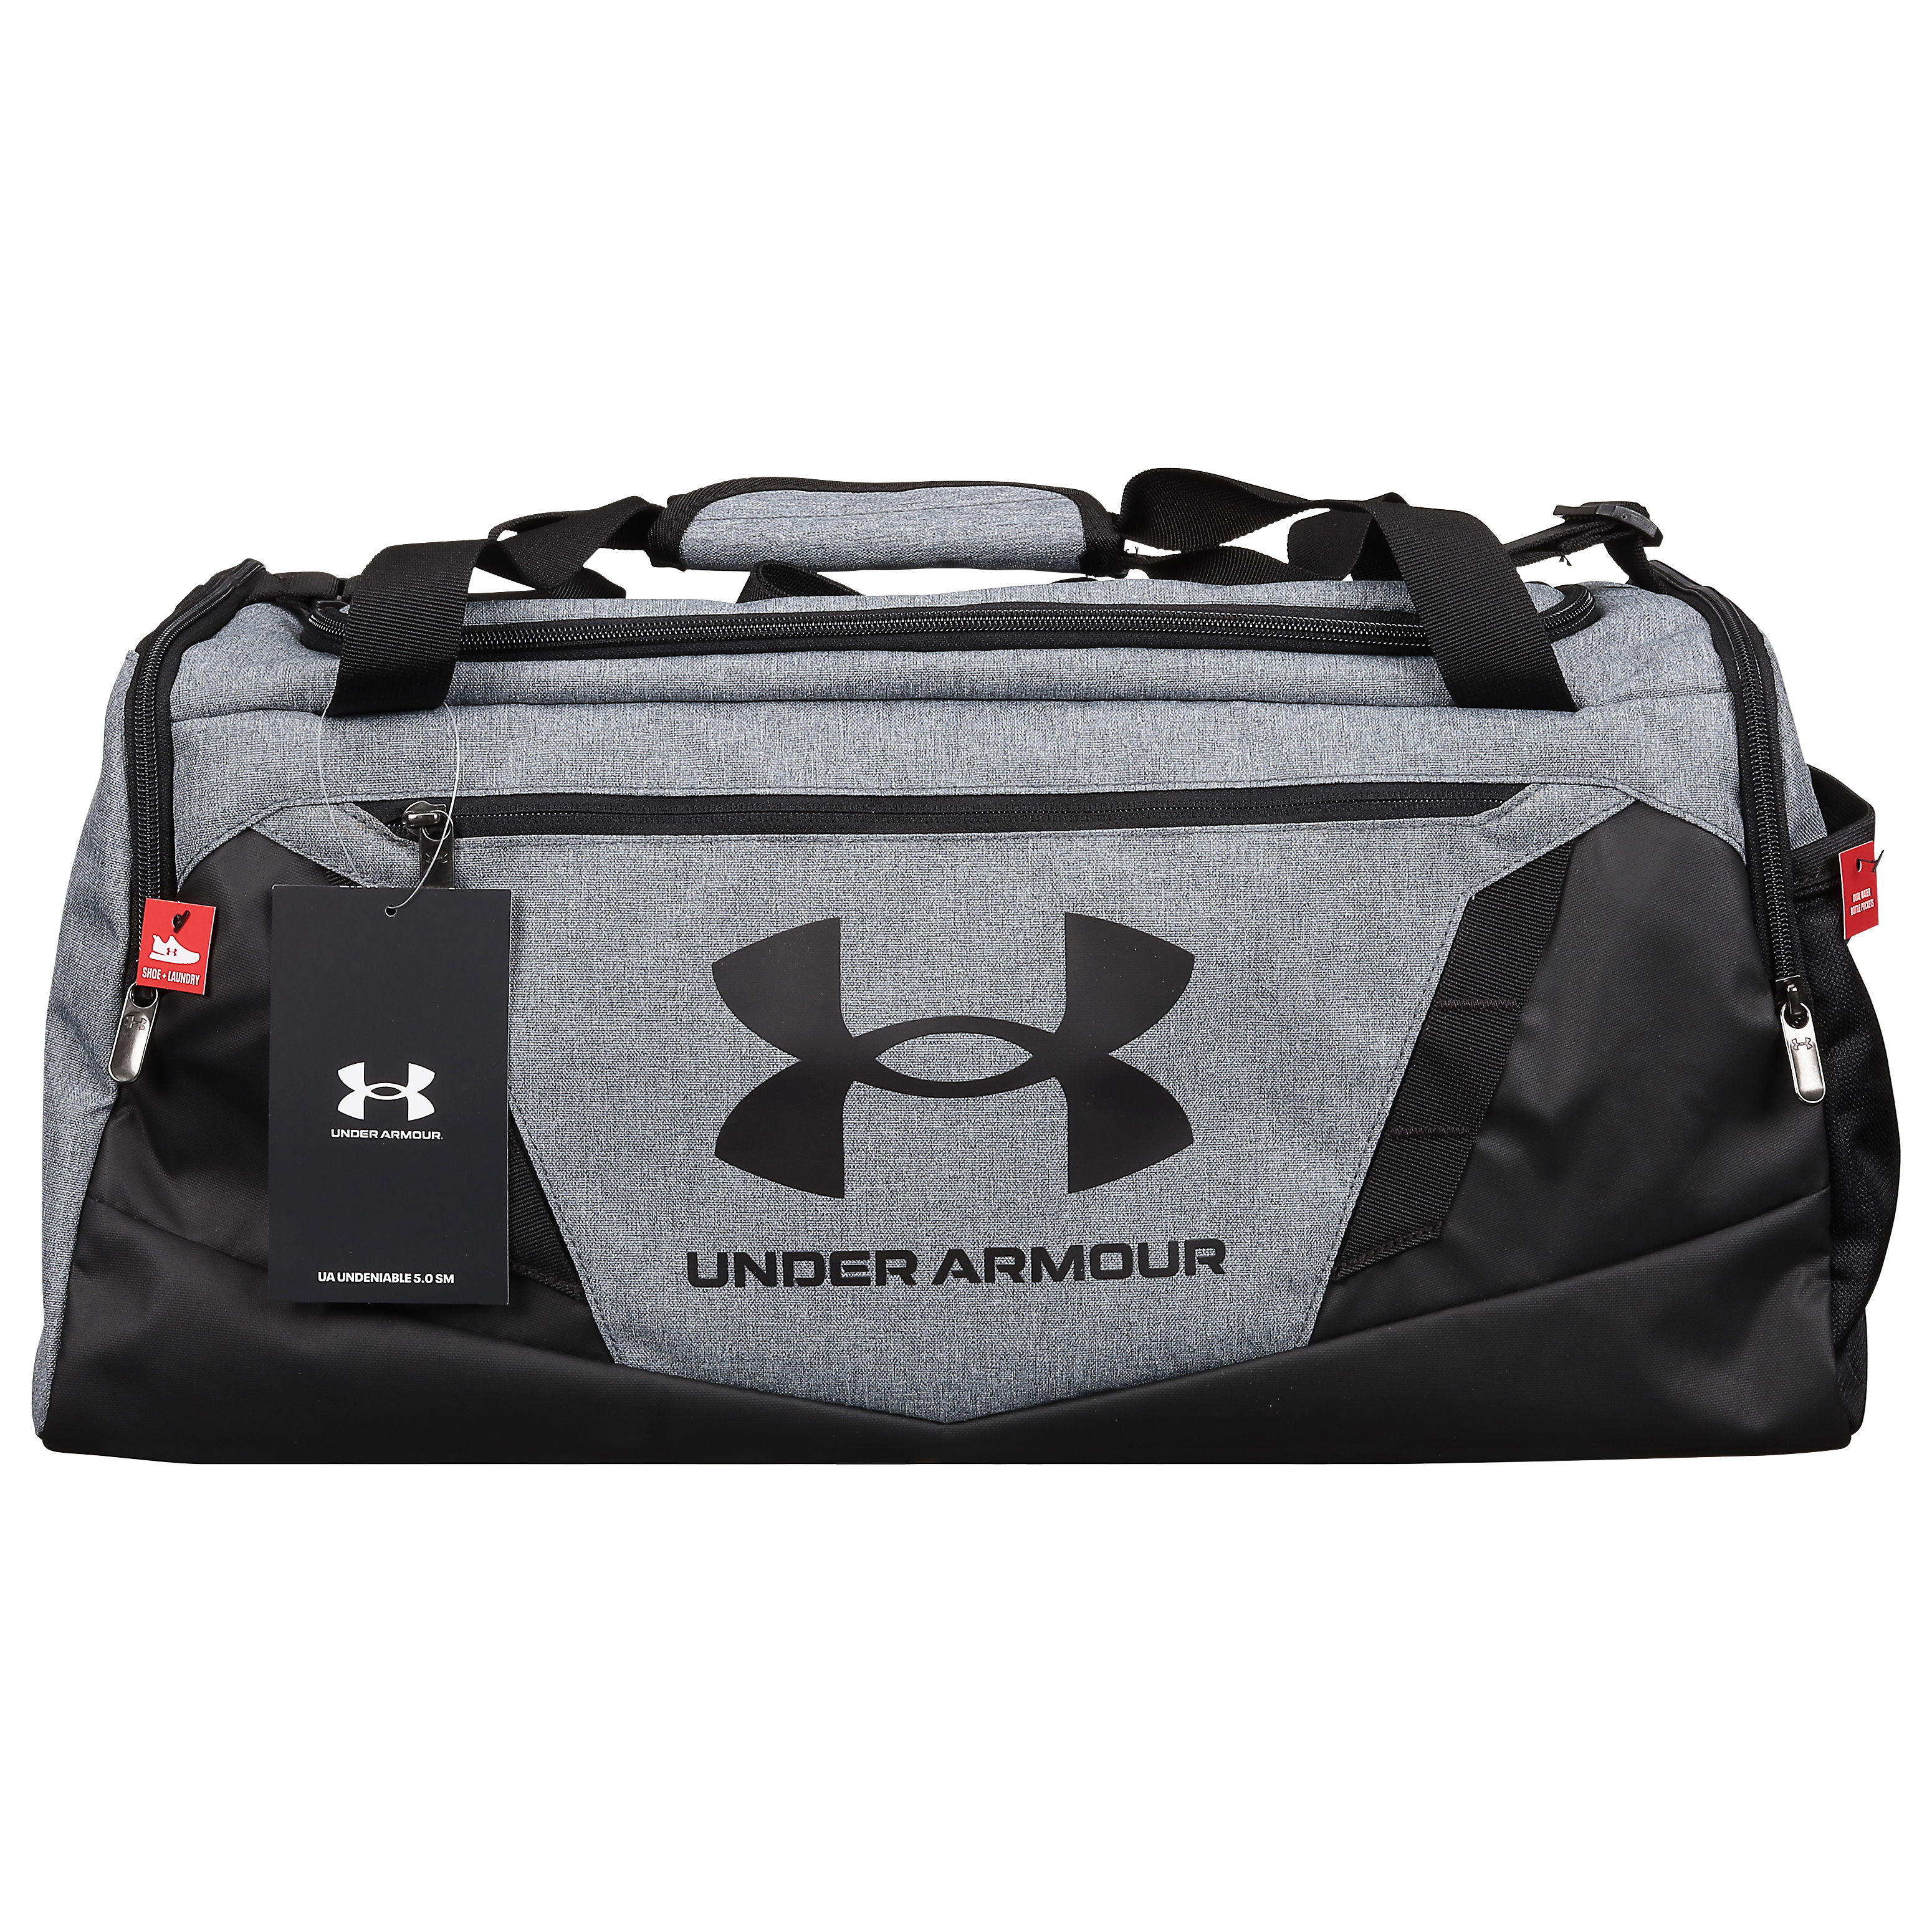 Under Armour Undeniable 5.0 Duffle - image 2 of 2